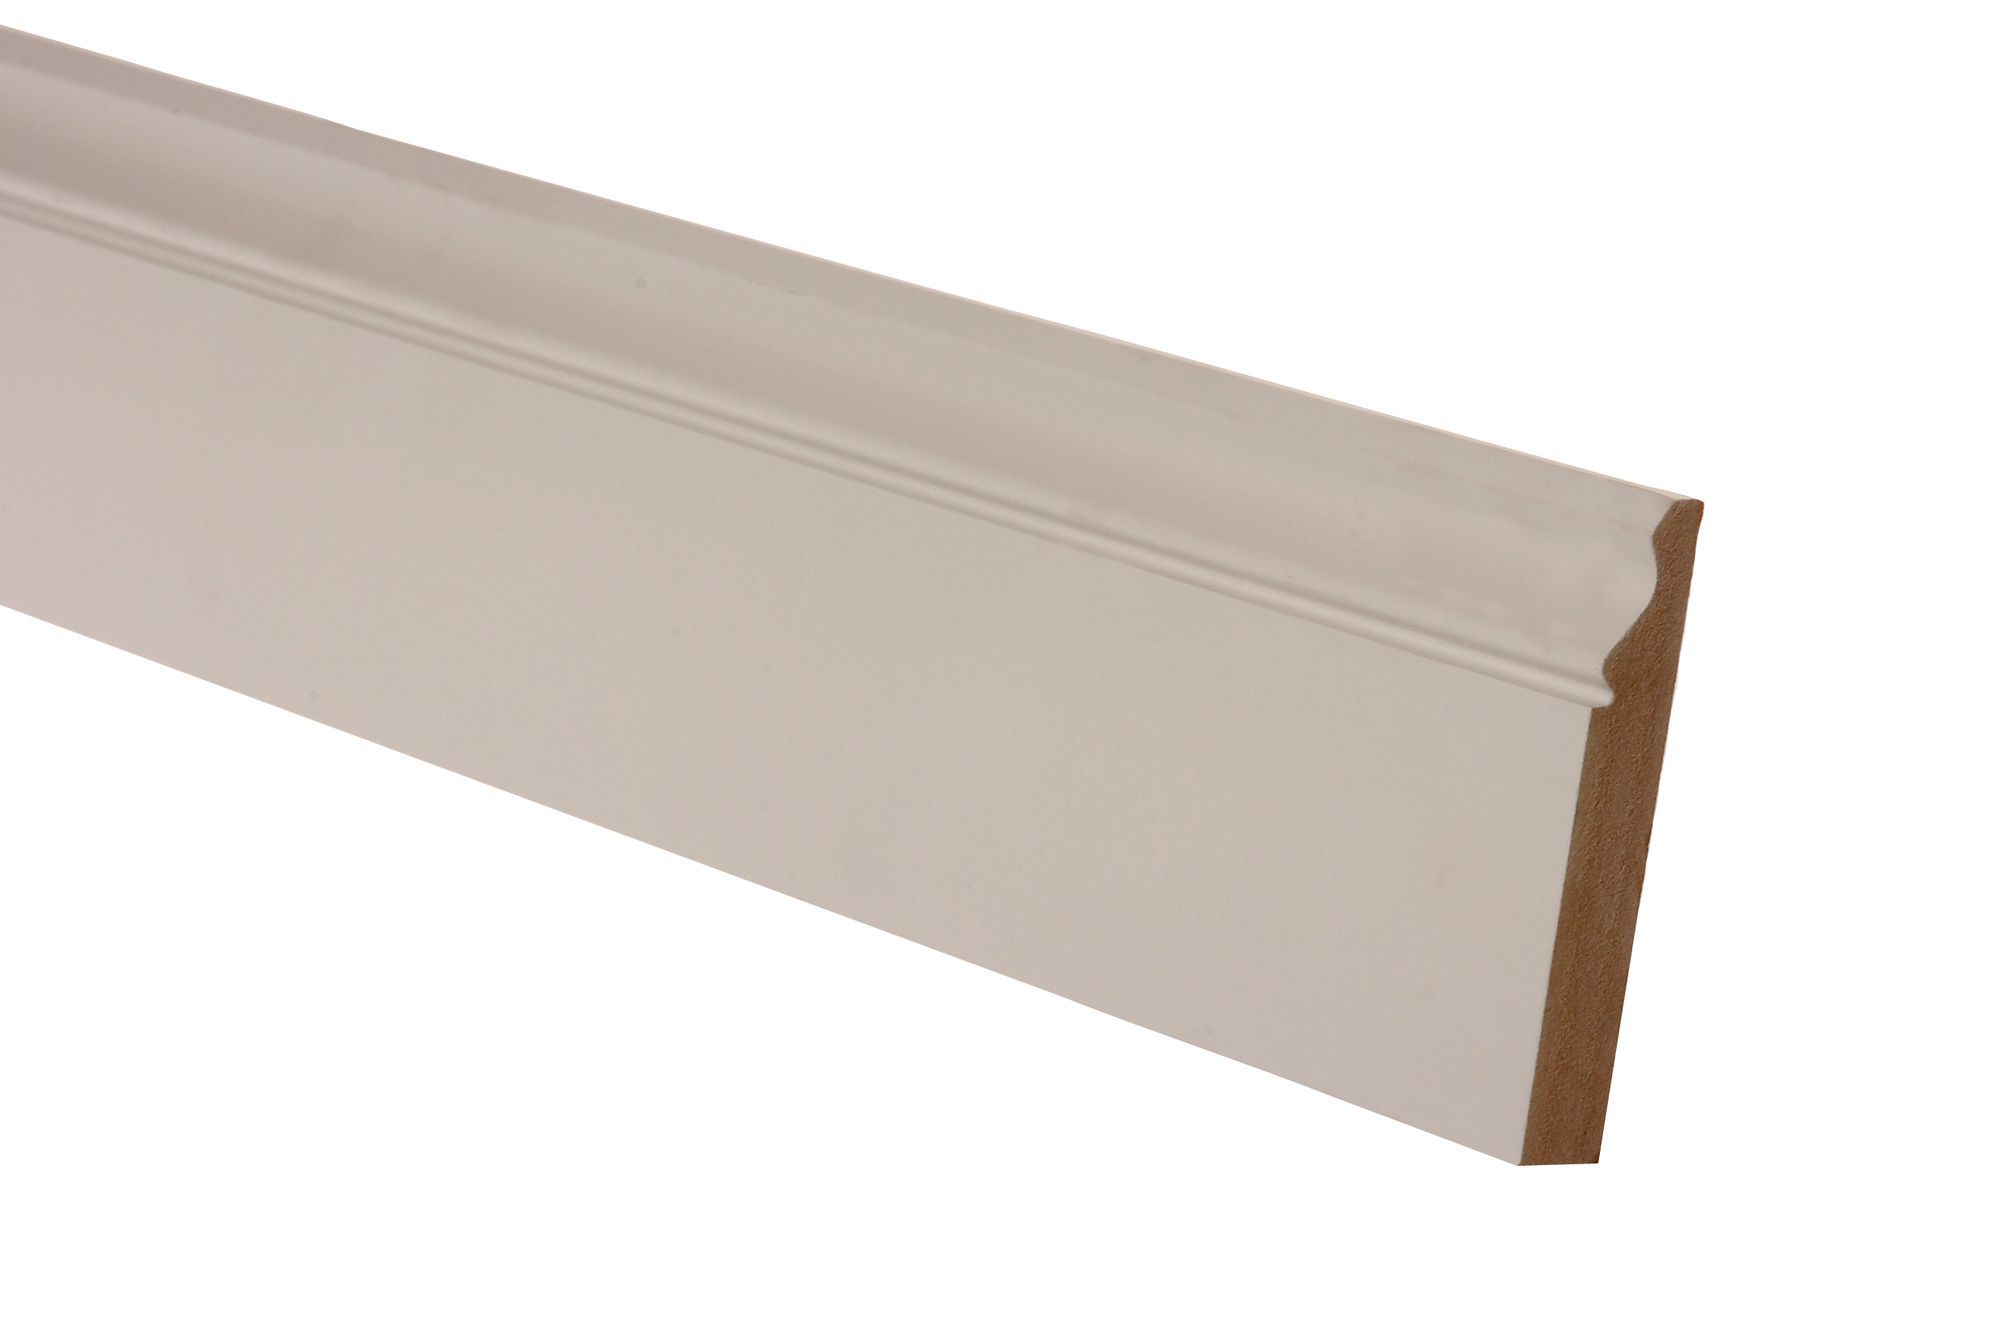 Metsä Wood Primed White MDF Ogee Architrave (L)2.1m (W)69mm (T)18mm, Pack of 5